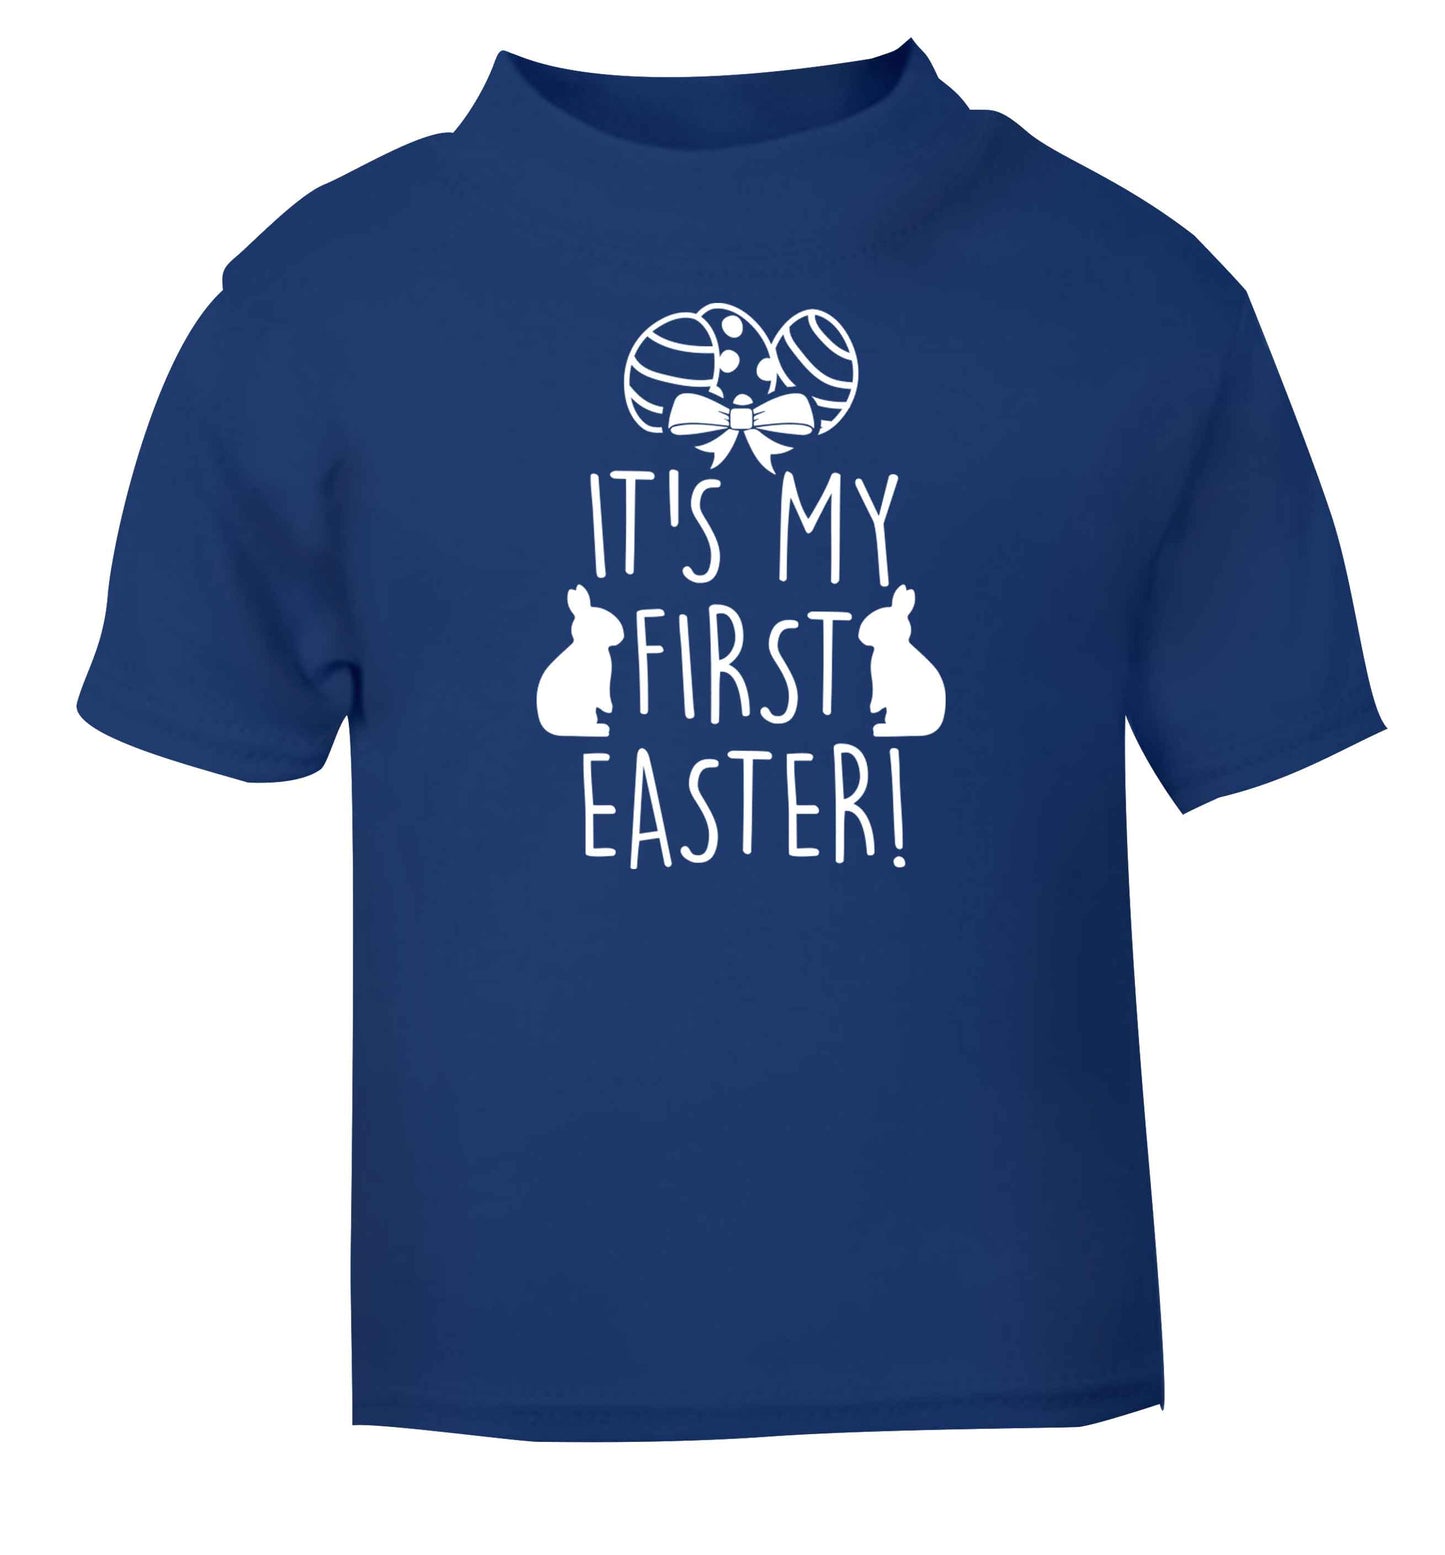 It's my first Easter blue baby toddler Tshirt 2 Years